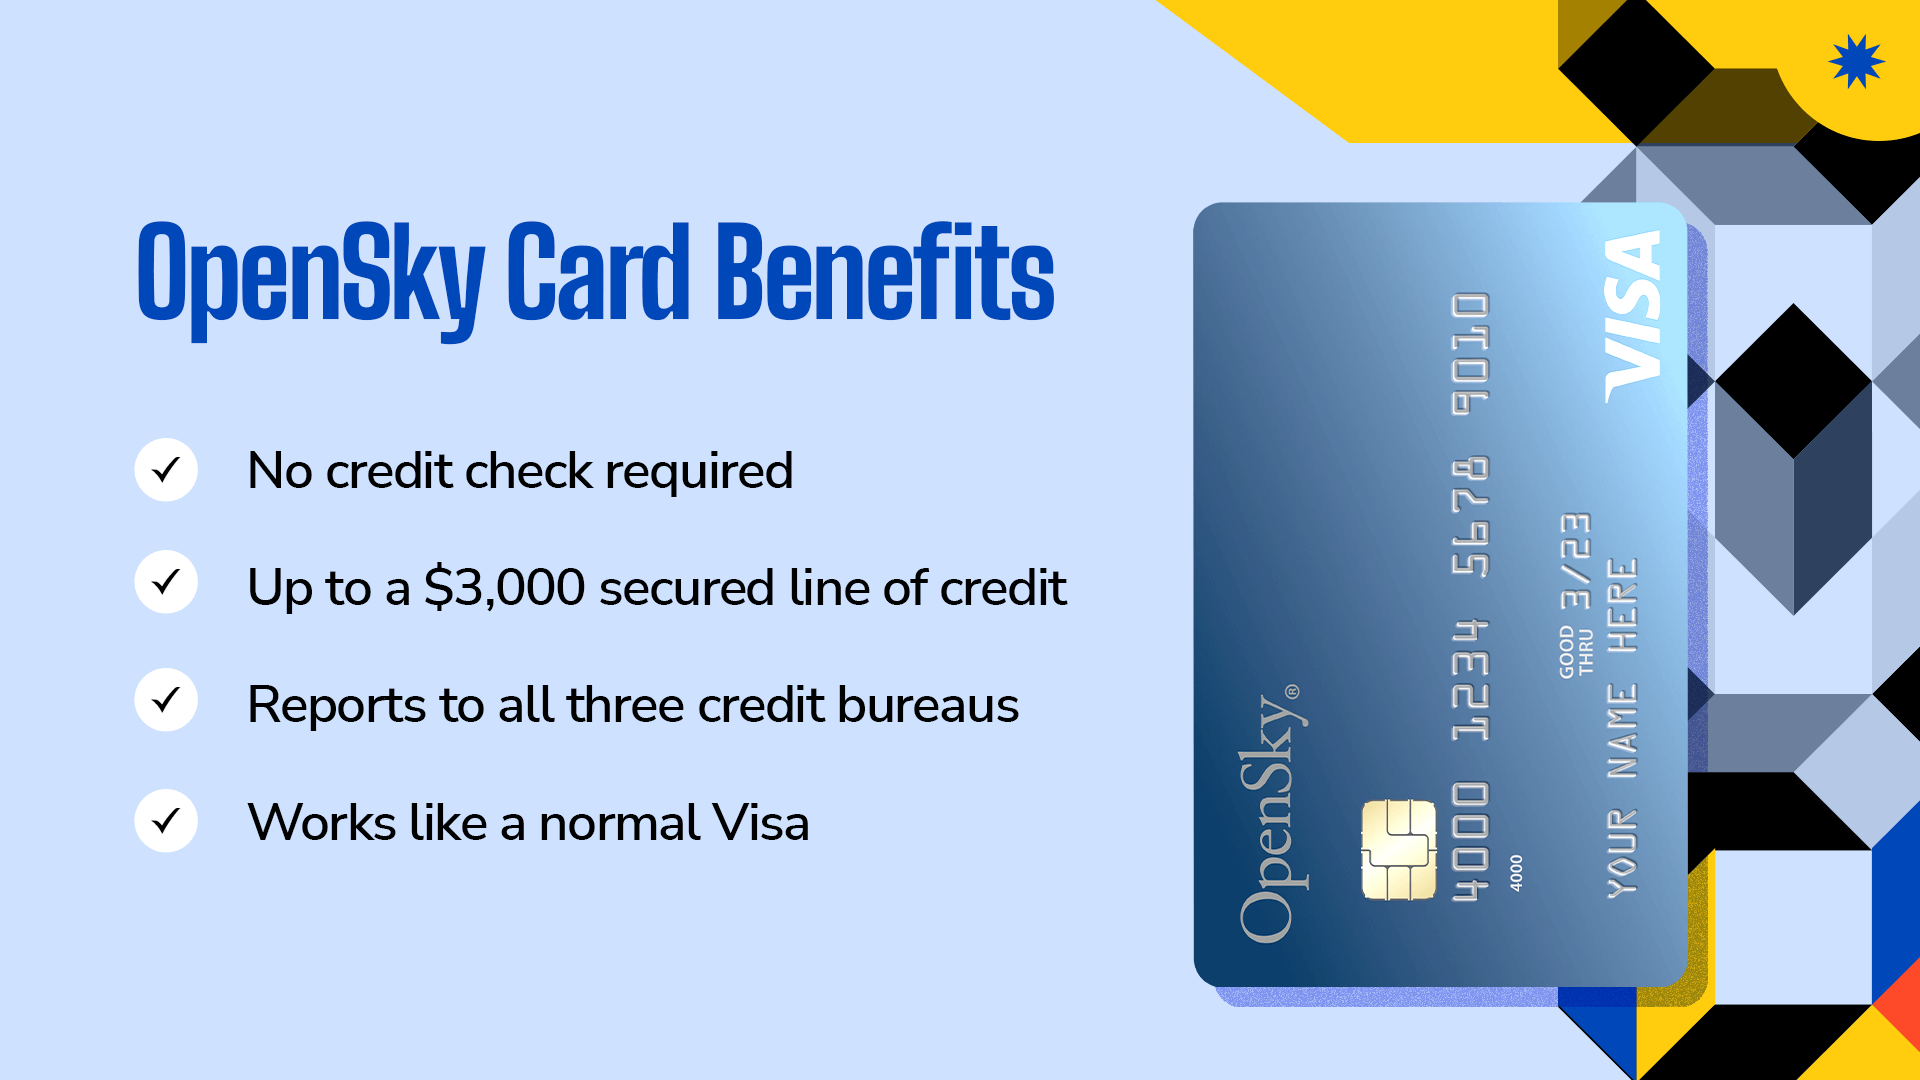 Main features of the OpenSky card